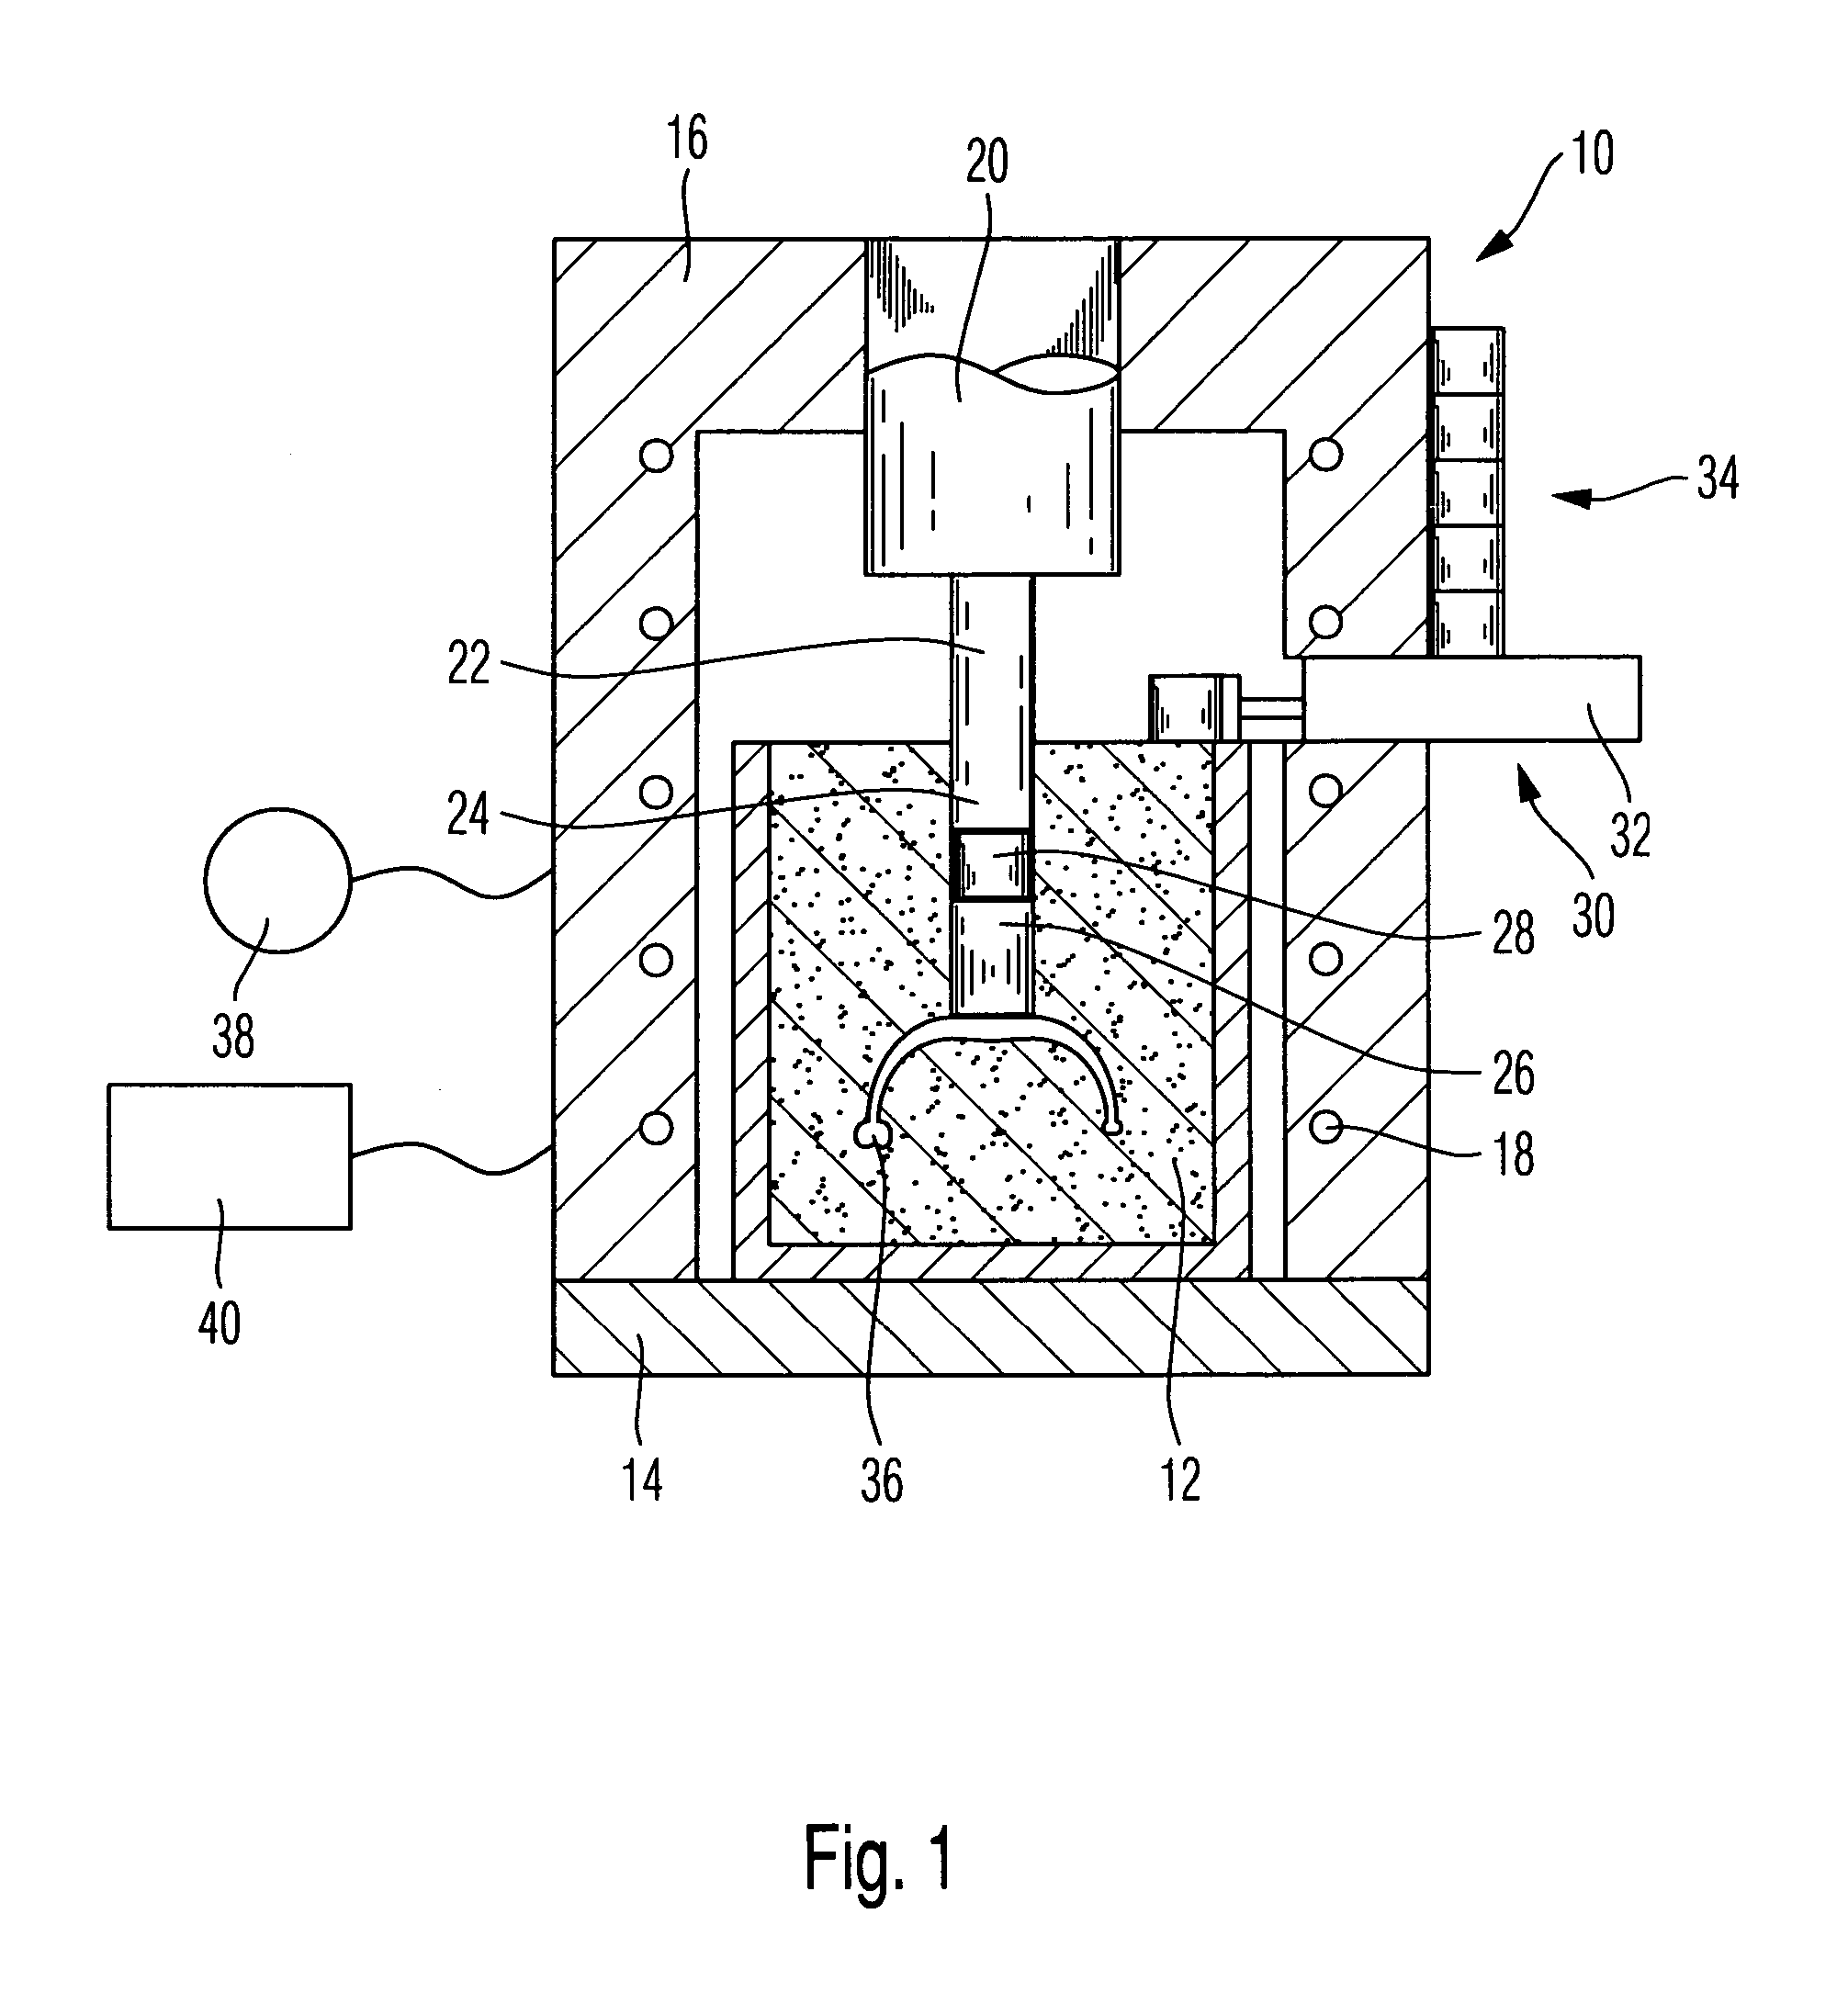 Press oven including an intermediate body, and method for use